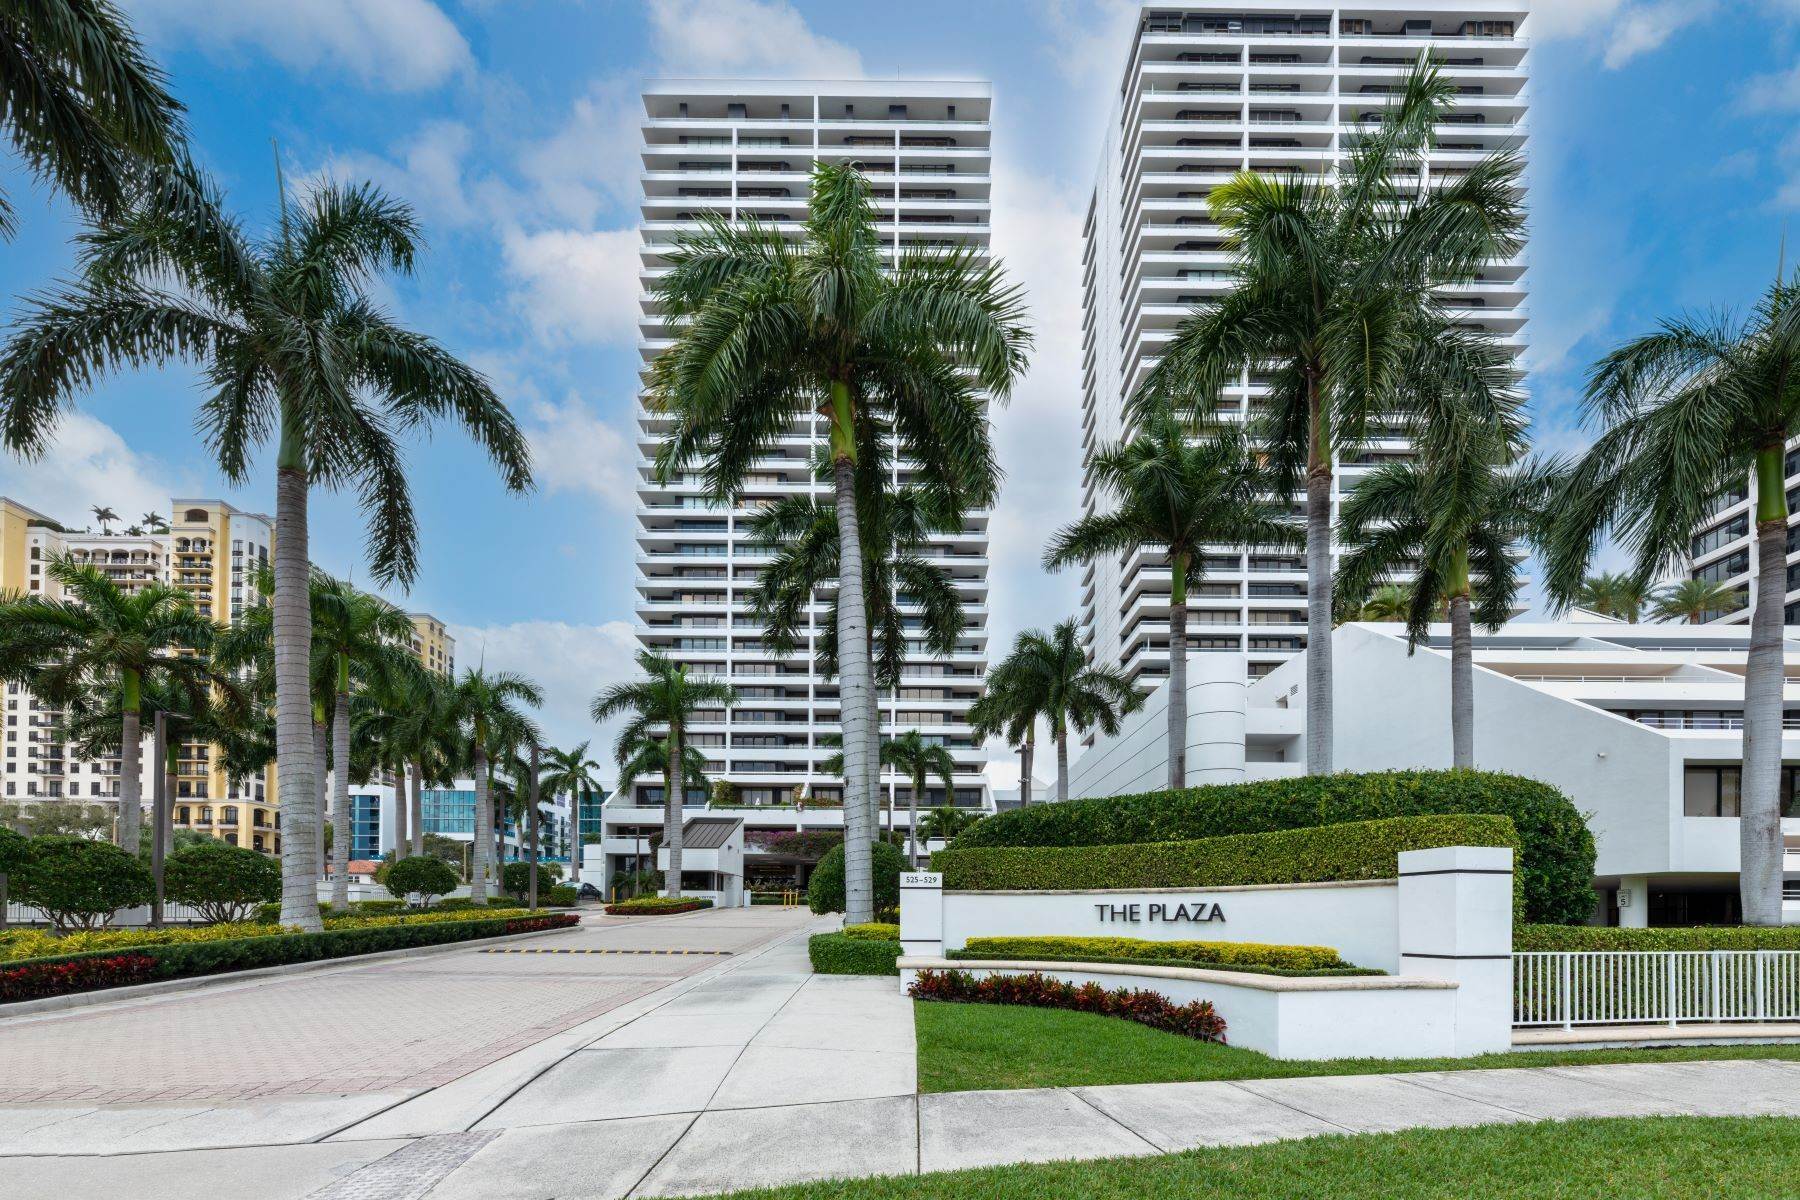 Condominiums for Sale at The Plaza of The Palm Beaches 15C 525 S Flagler Drive, 15C West Palm Beach, Florida 33401 United States